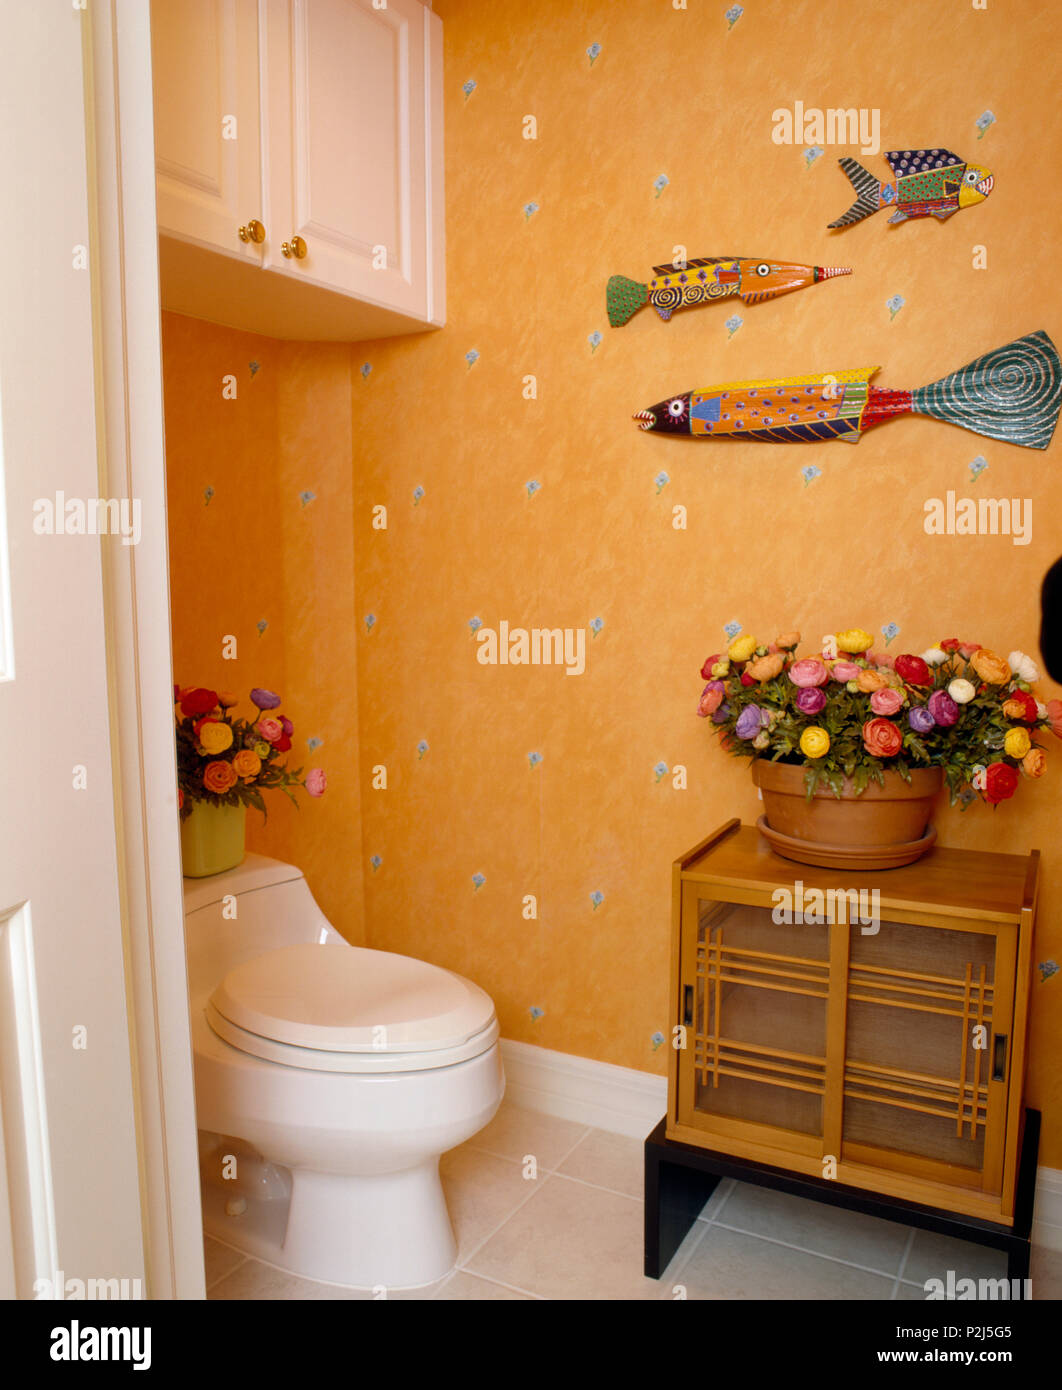 Brightly coloured wooden fishes on wall above toilet in cloakroom with orange wallpaper Stock Photo